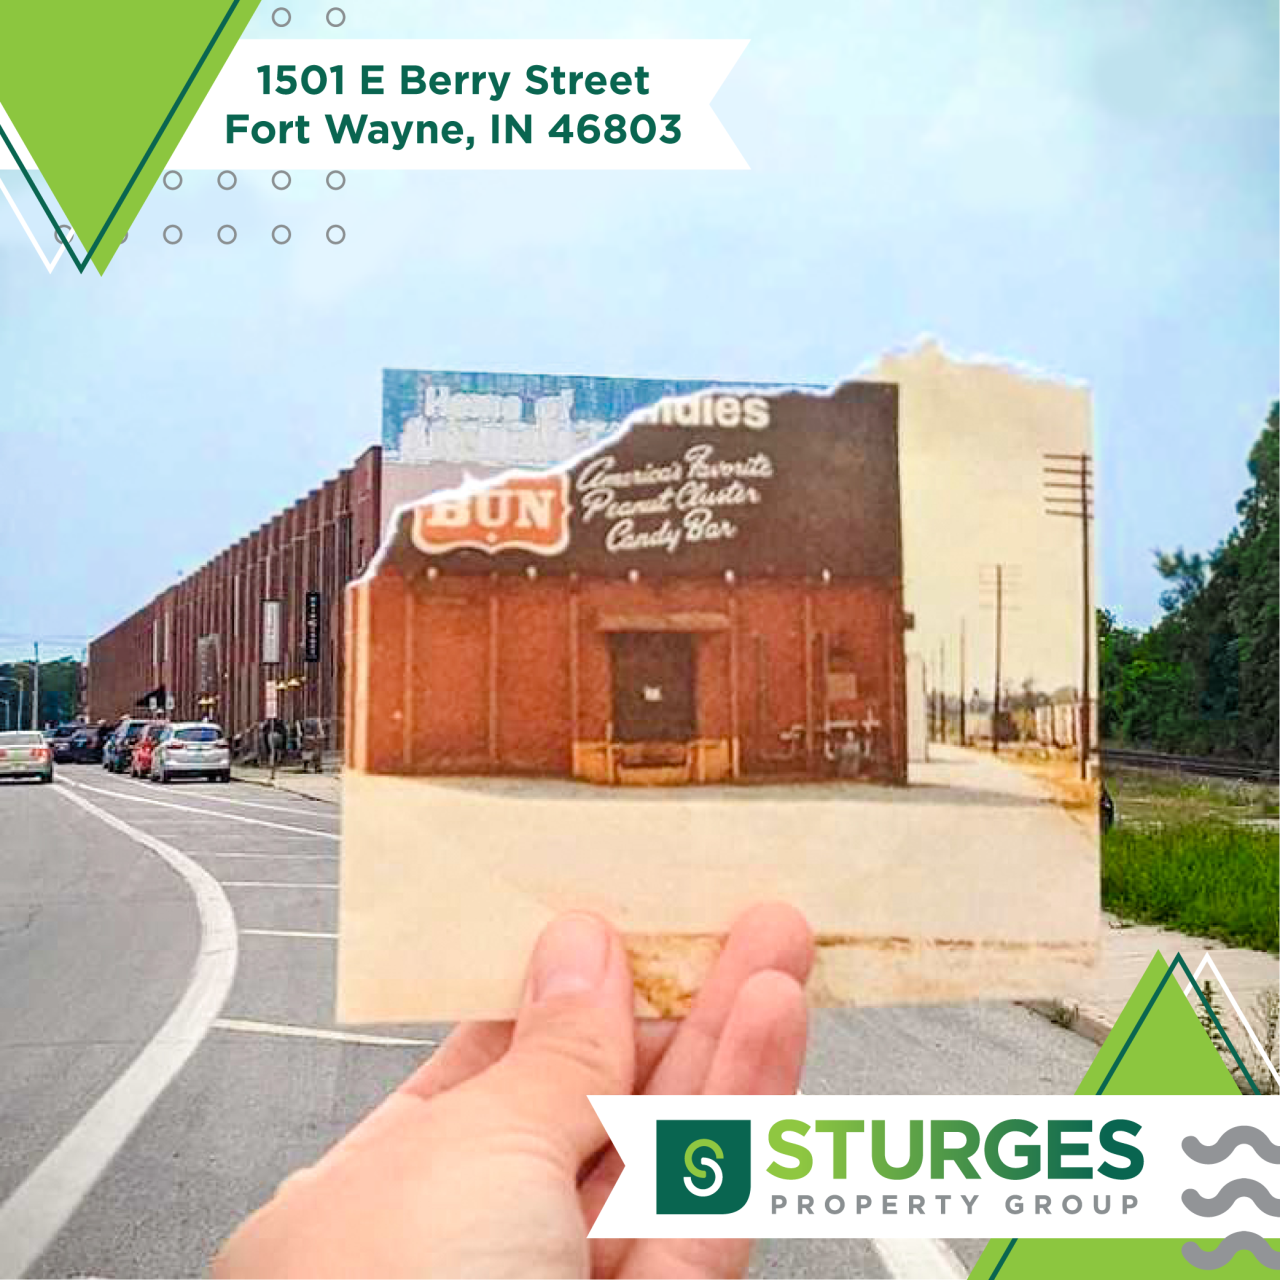 Sturges Property Group - Olde East End, 1501 E Berry St, Fort Wayne, IN 46803